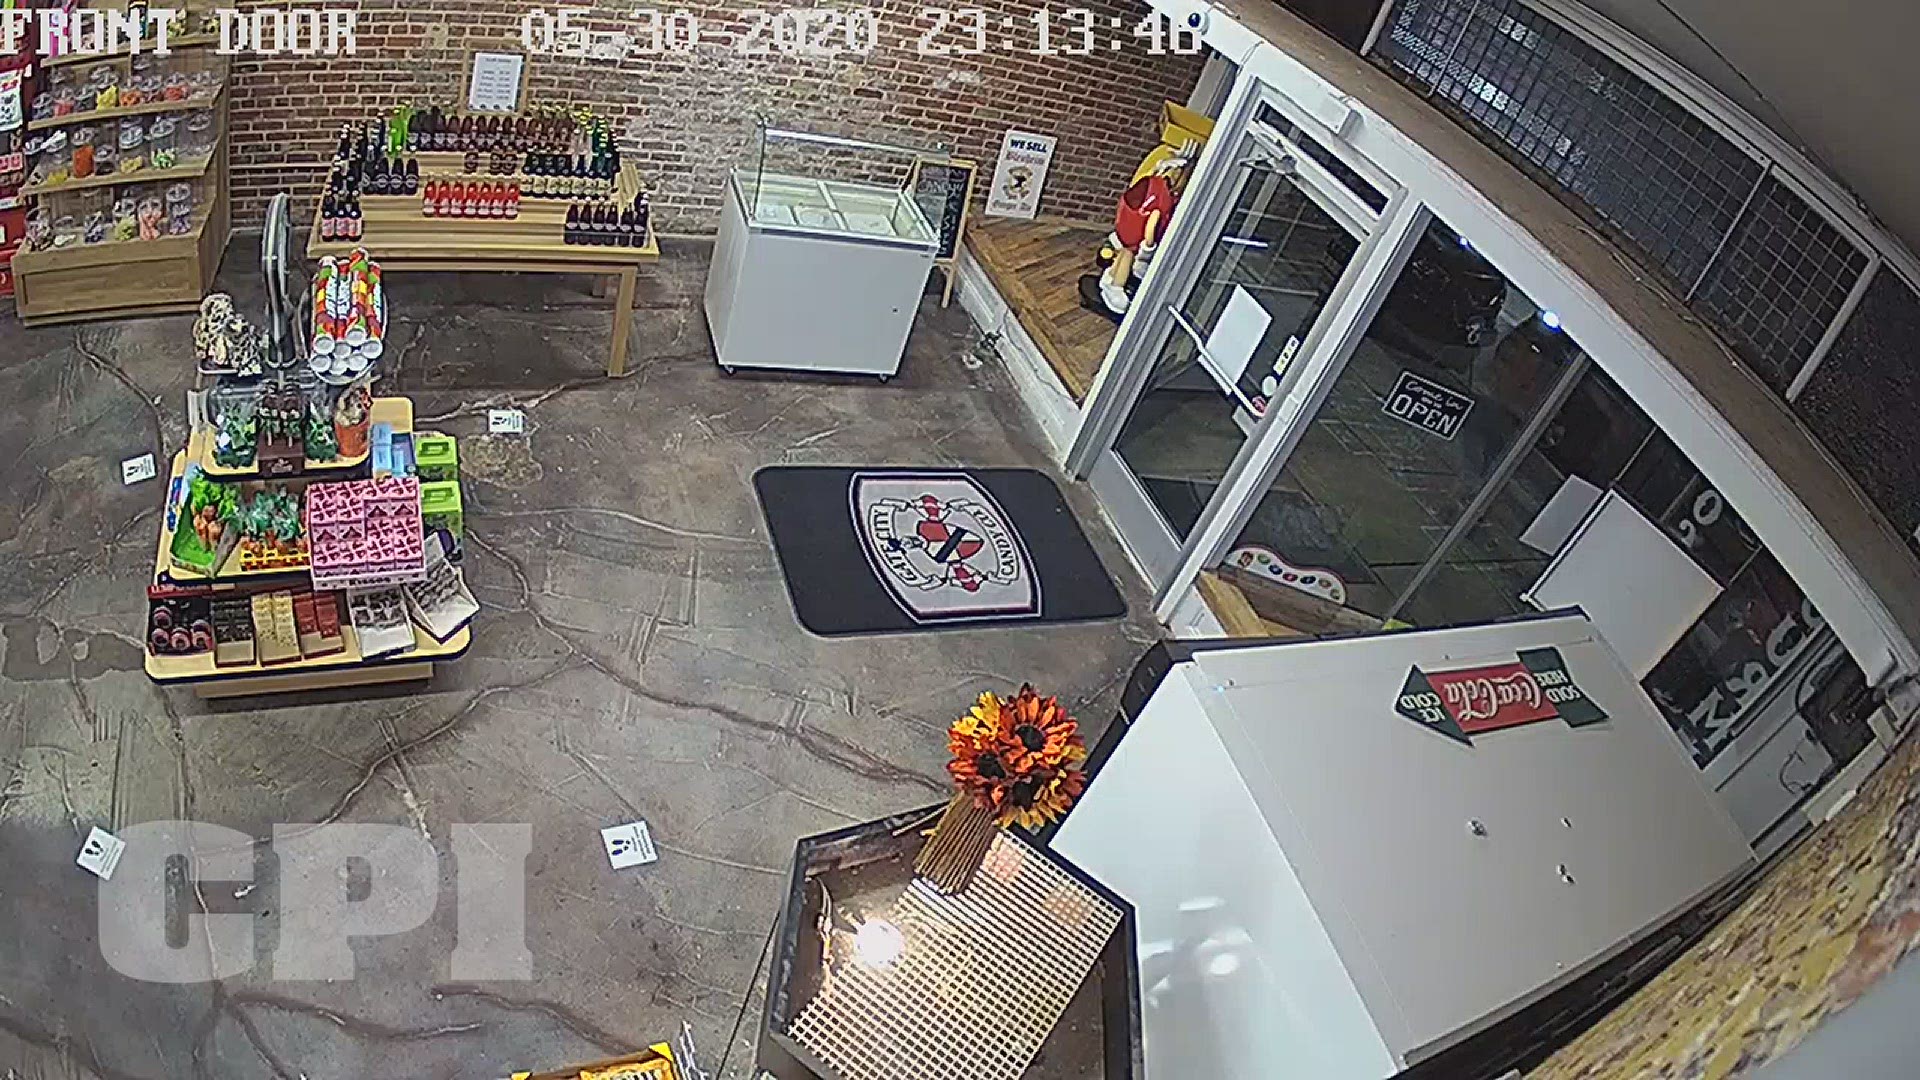 In the video you can see a suspect smashing the windows of Gate City Candy Company with a stool Saturday night.